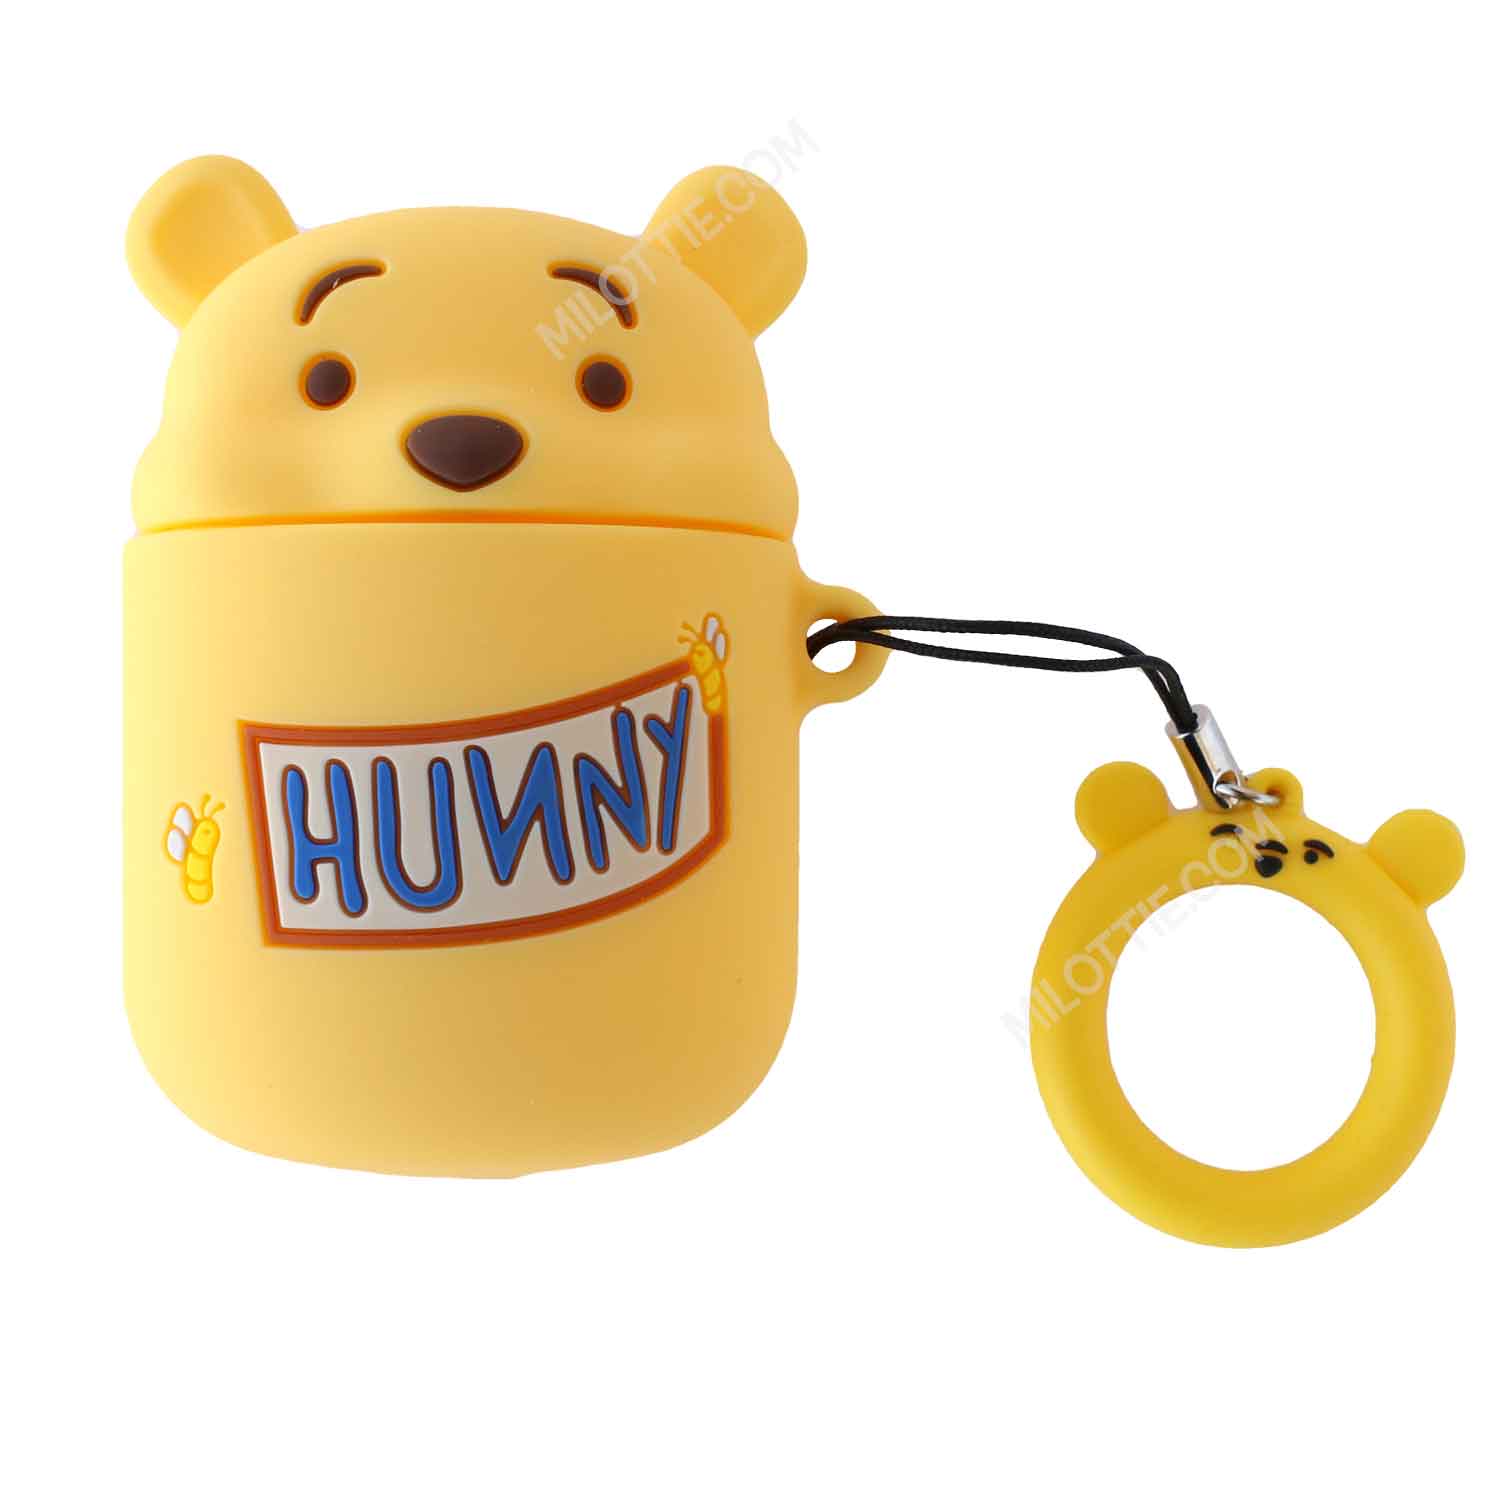 Pooh Hunny Apple Airpods Case